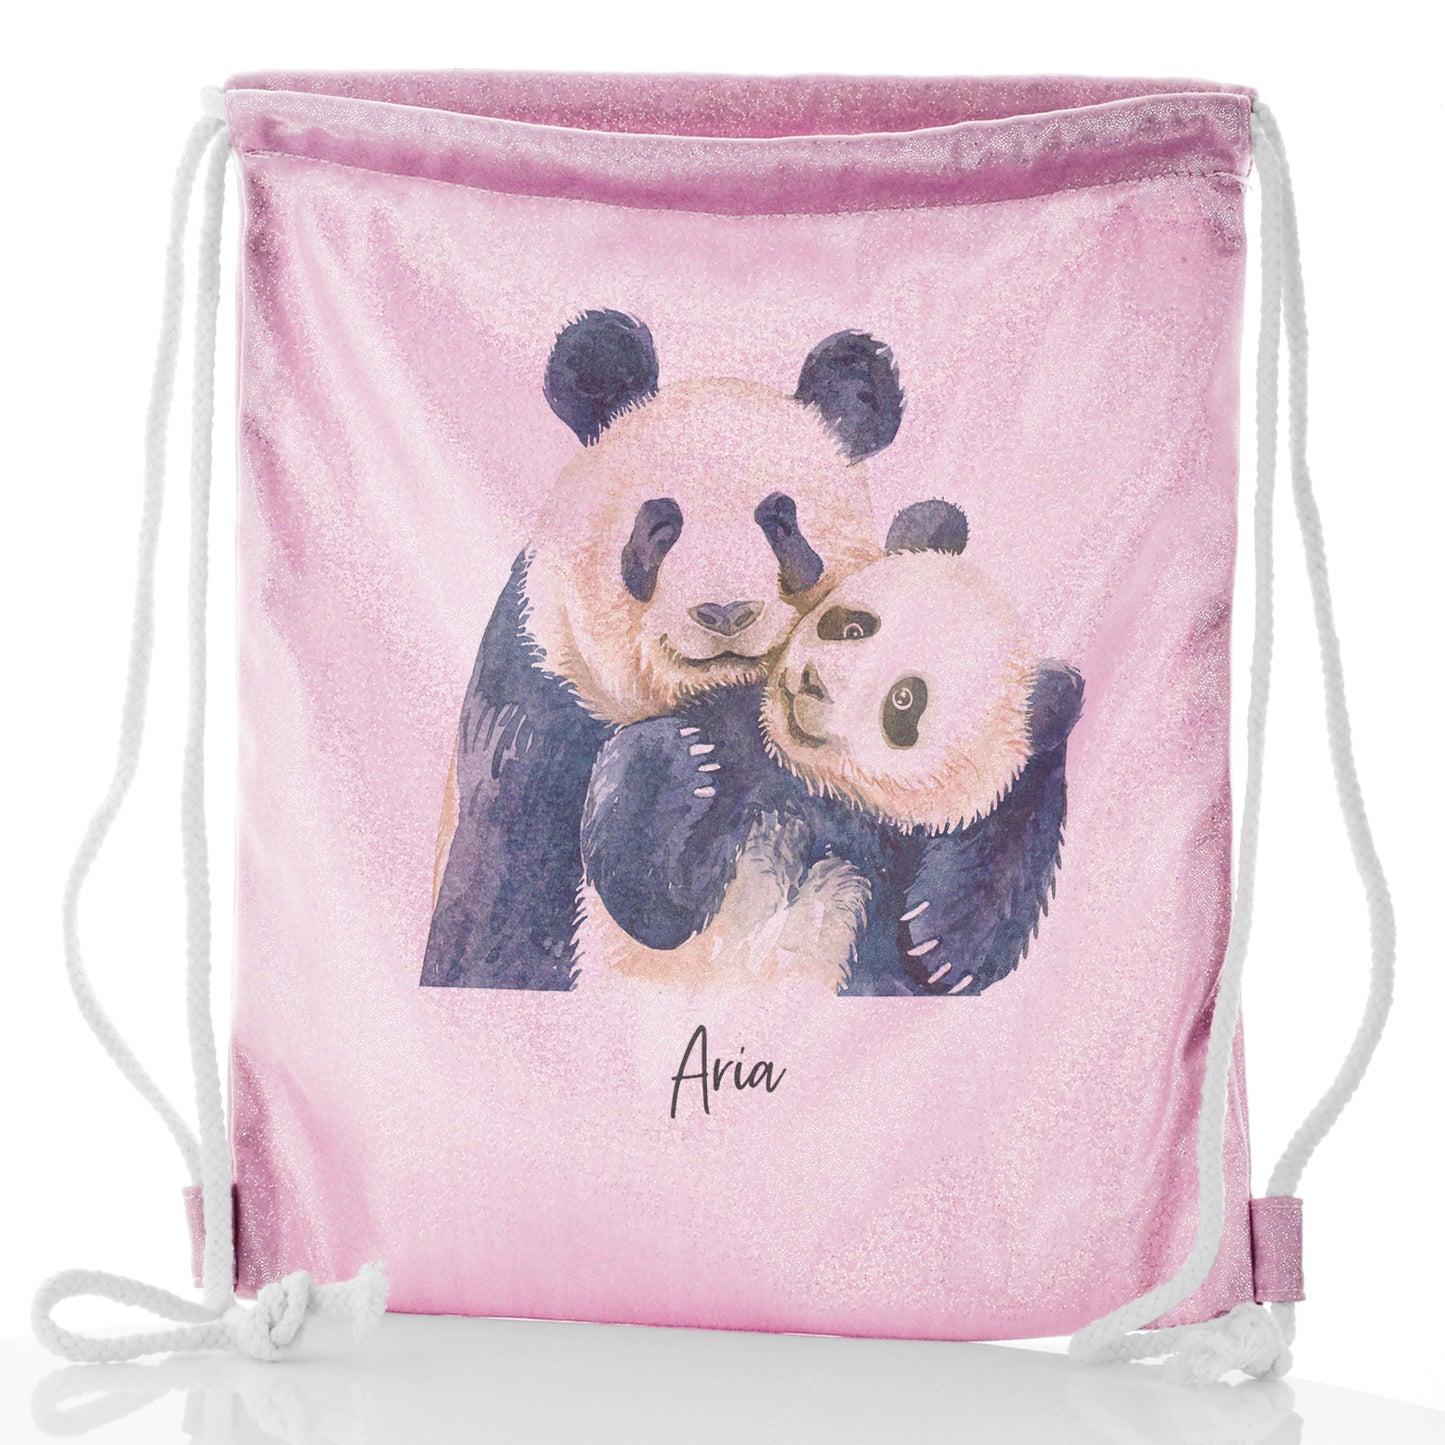 Personalised Glitter Drawstring Backpack with Welcoming Text and Embracing Mum and Baby Pandas